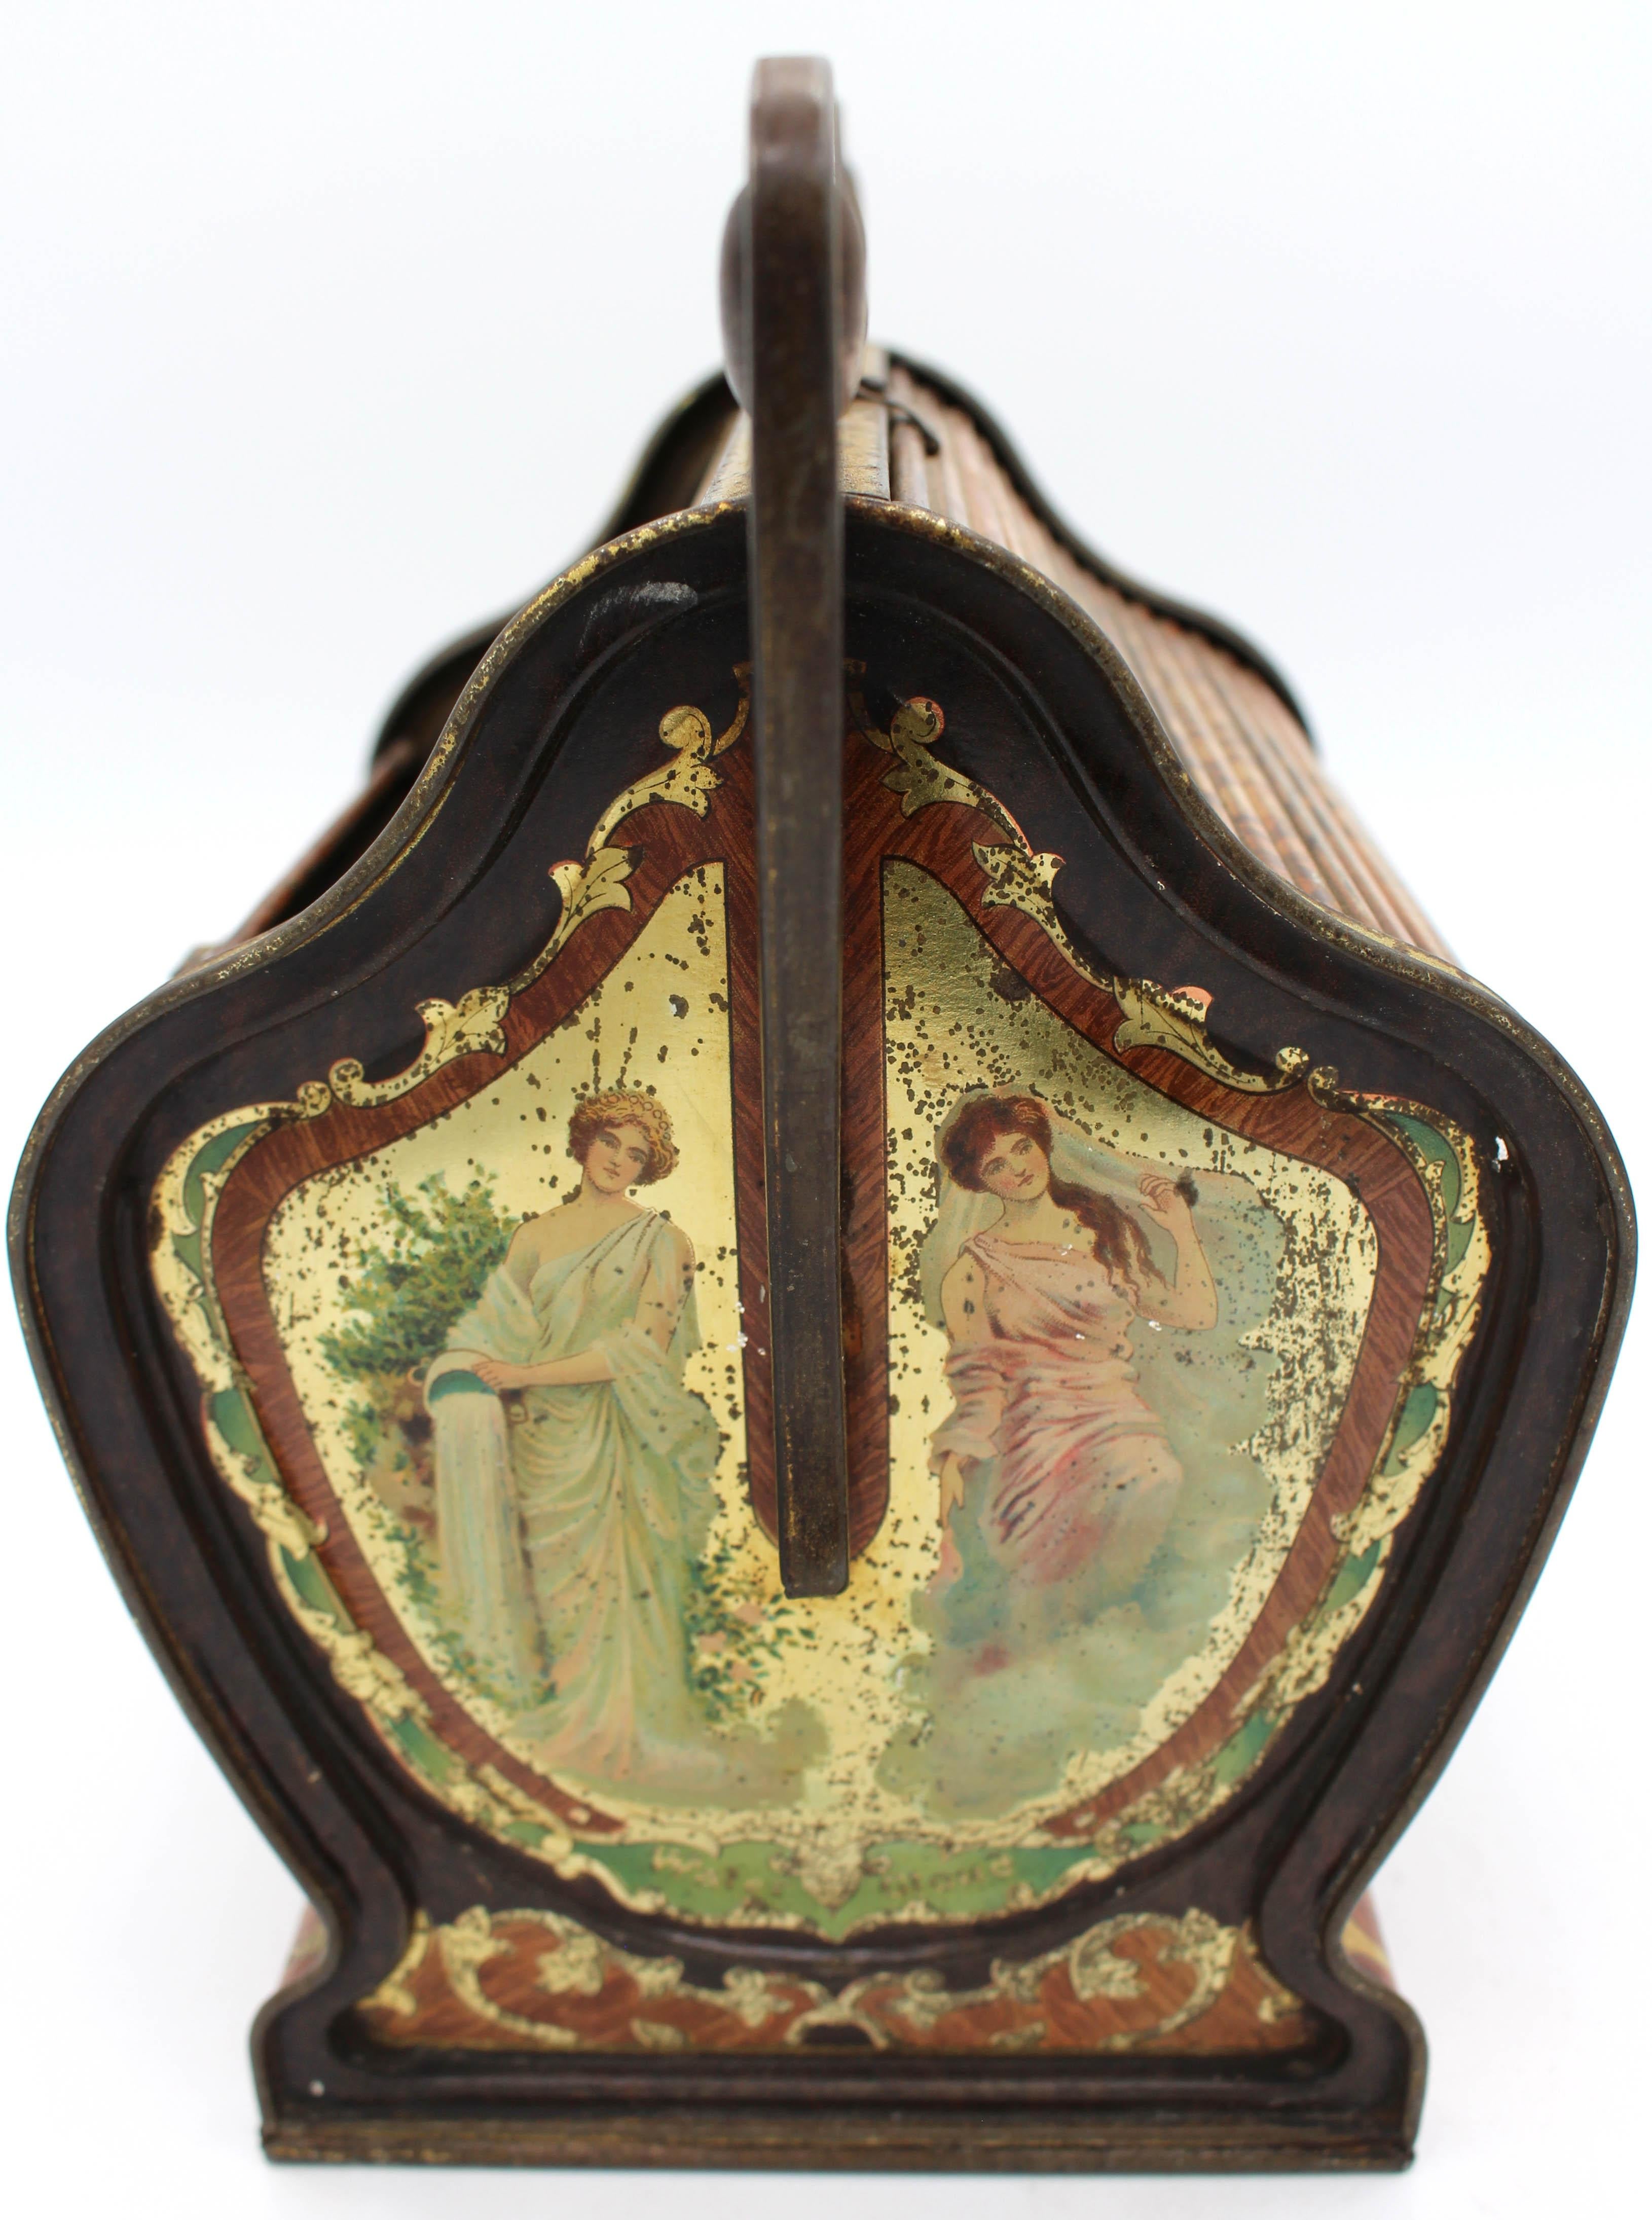 1906 Art Nouveau Biscuit Tin by Huntley & Palmers For Sale 3